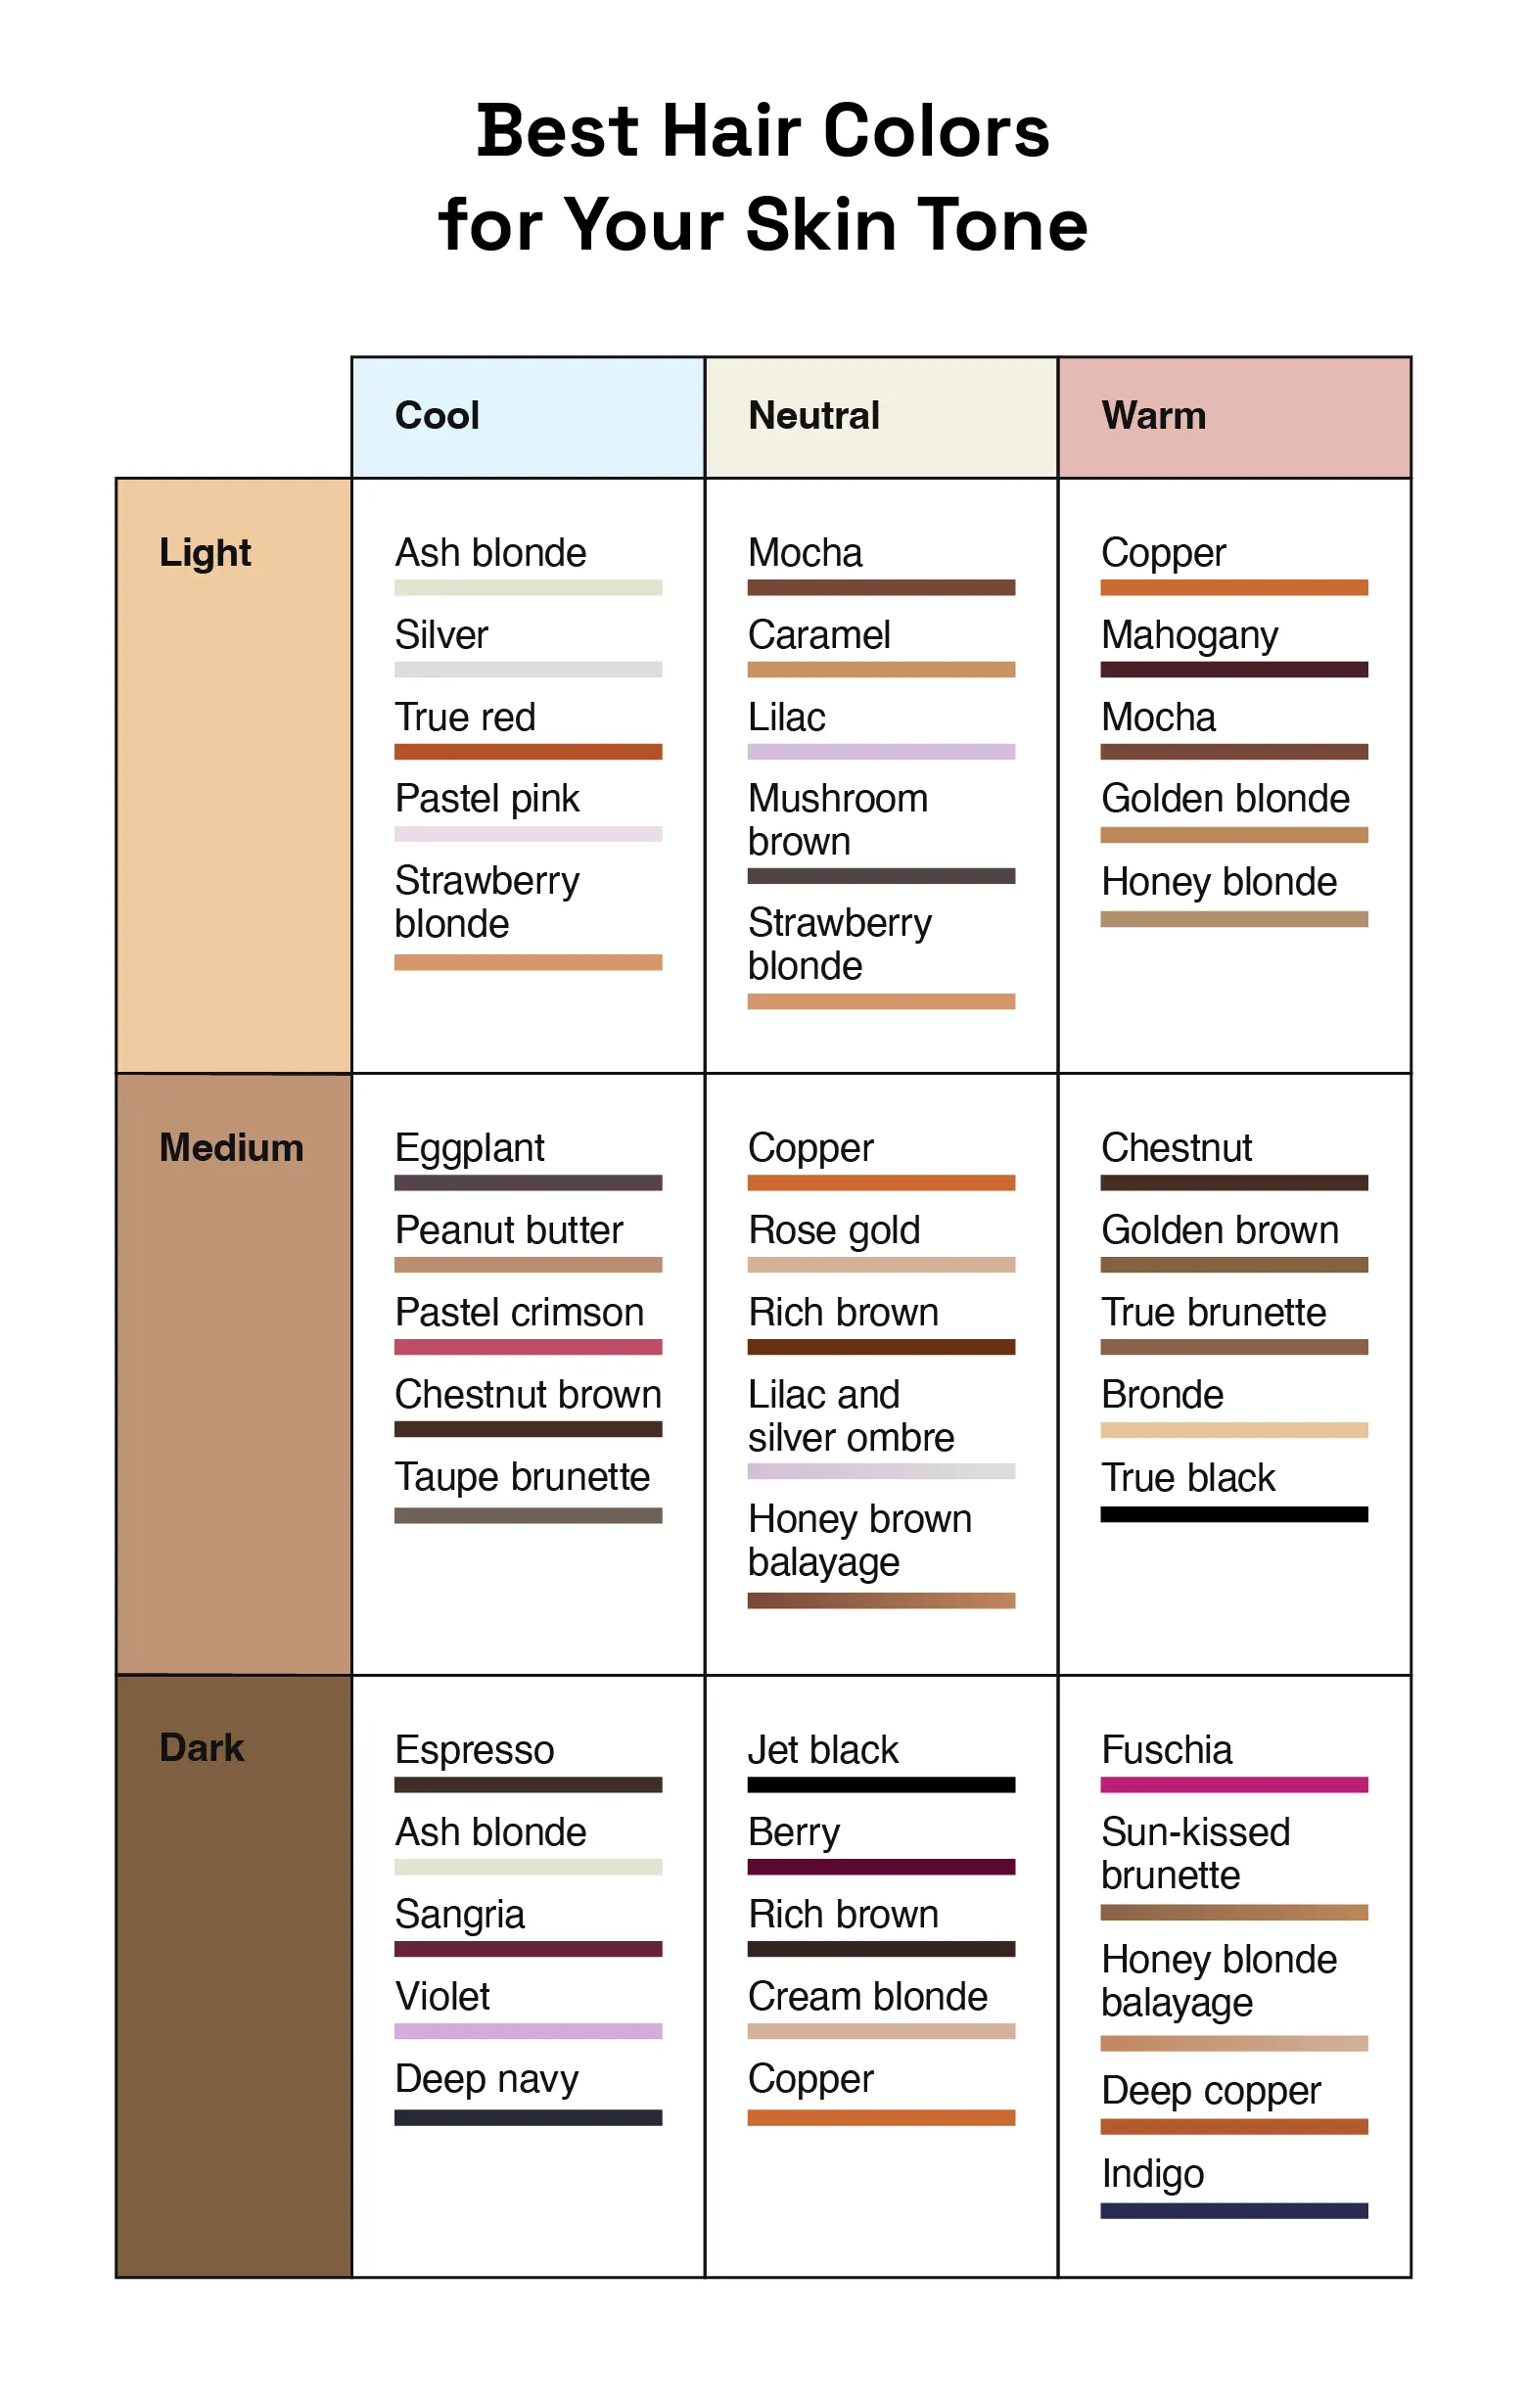 Best hair color for your skin tone chart.